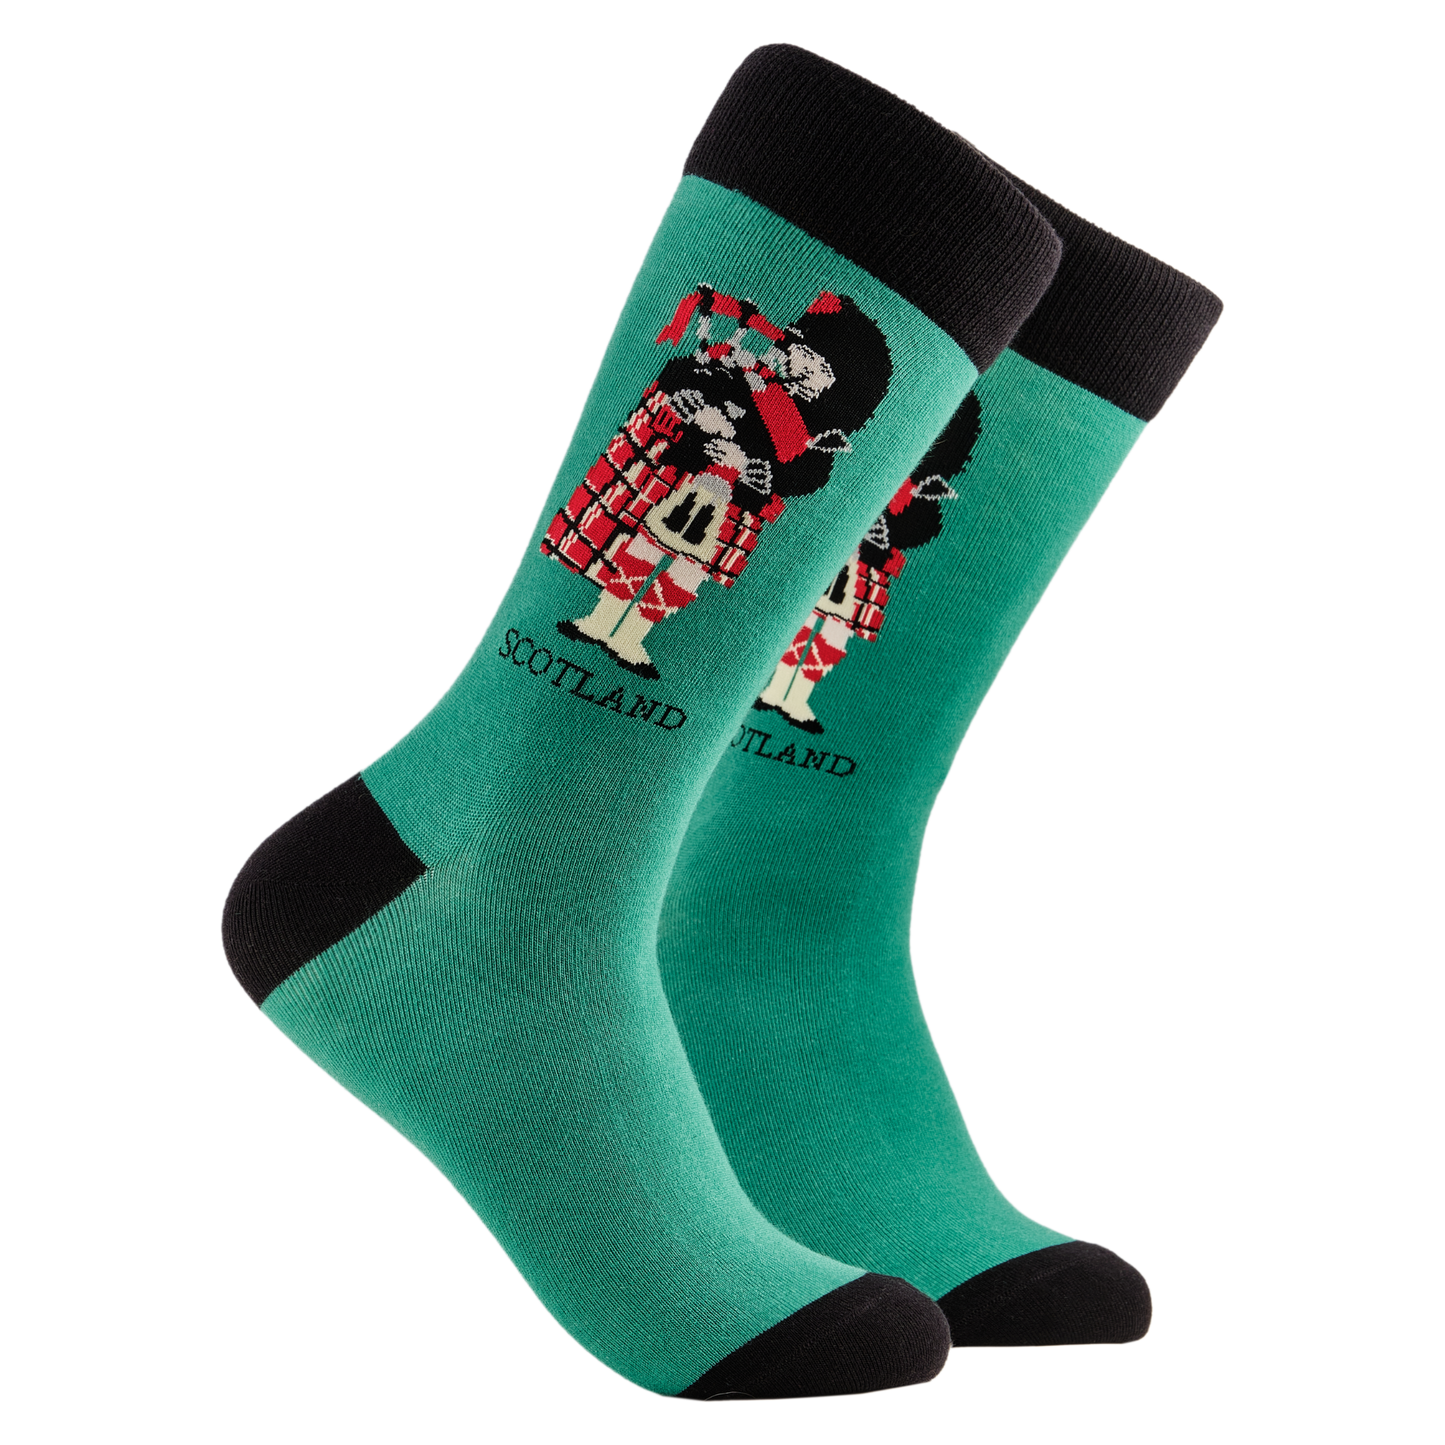 Scottish Socks - Piper. A pair of socks depicting a scotsman playing bag pipes. Green legs, black cuff, heel and toe.